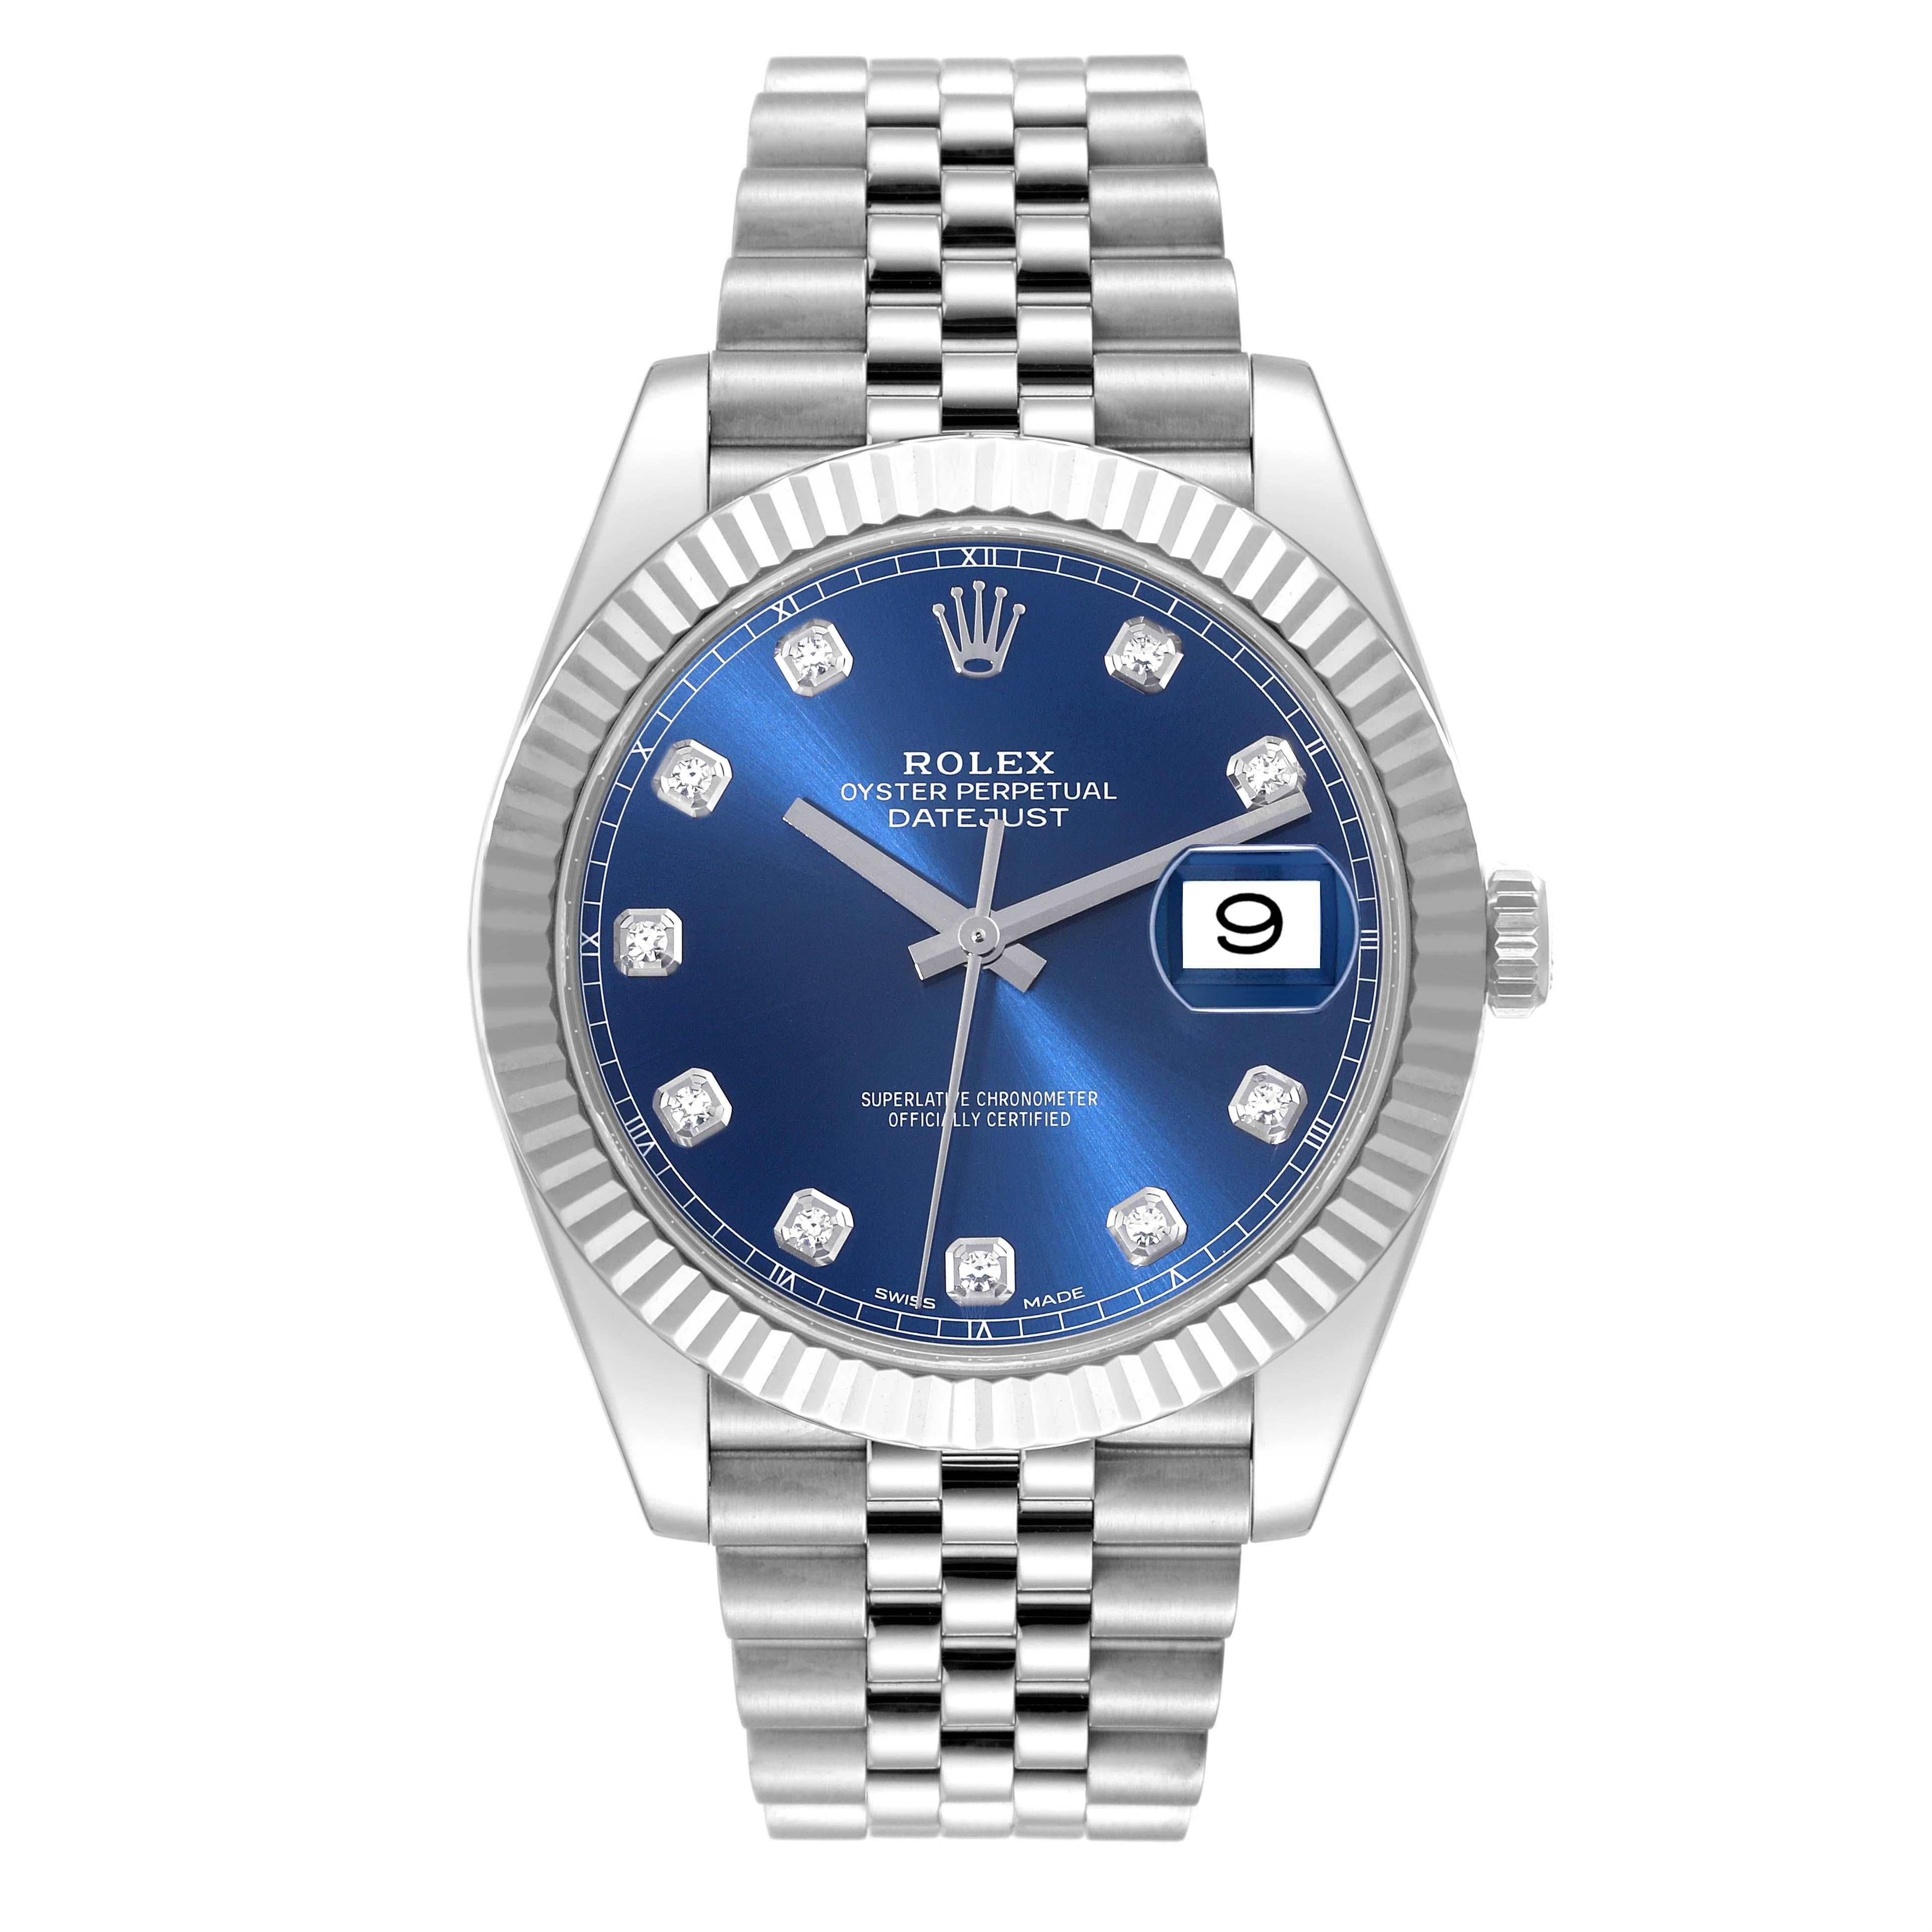 Rolex Datejust 41 Blue Diamond Dial Steel White Gold Mens Watch 126334 Box Card. Officially certified chronometer automatic self-winding movement. Stainless steel case 41 mm in diameter. Rolex logo on a crown. 18k white gold fluted bezel. Scratch